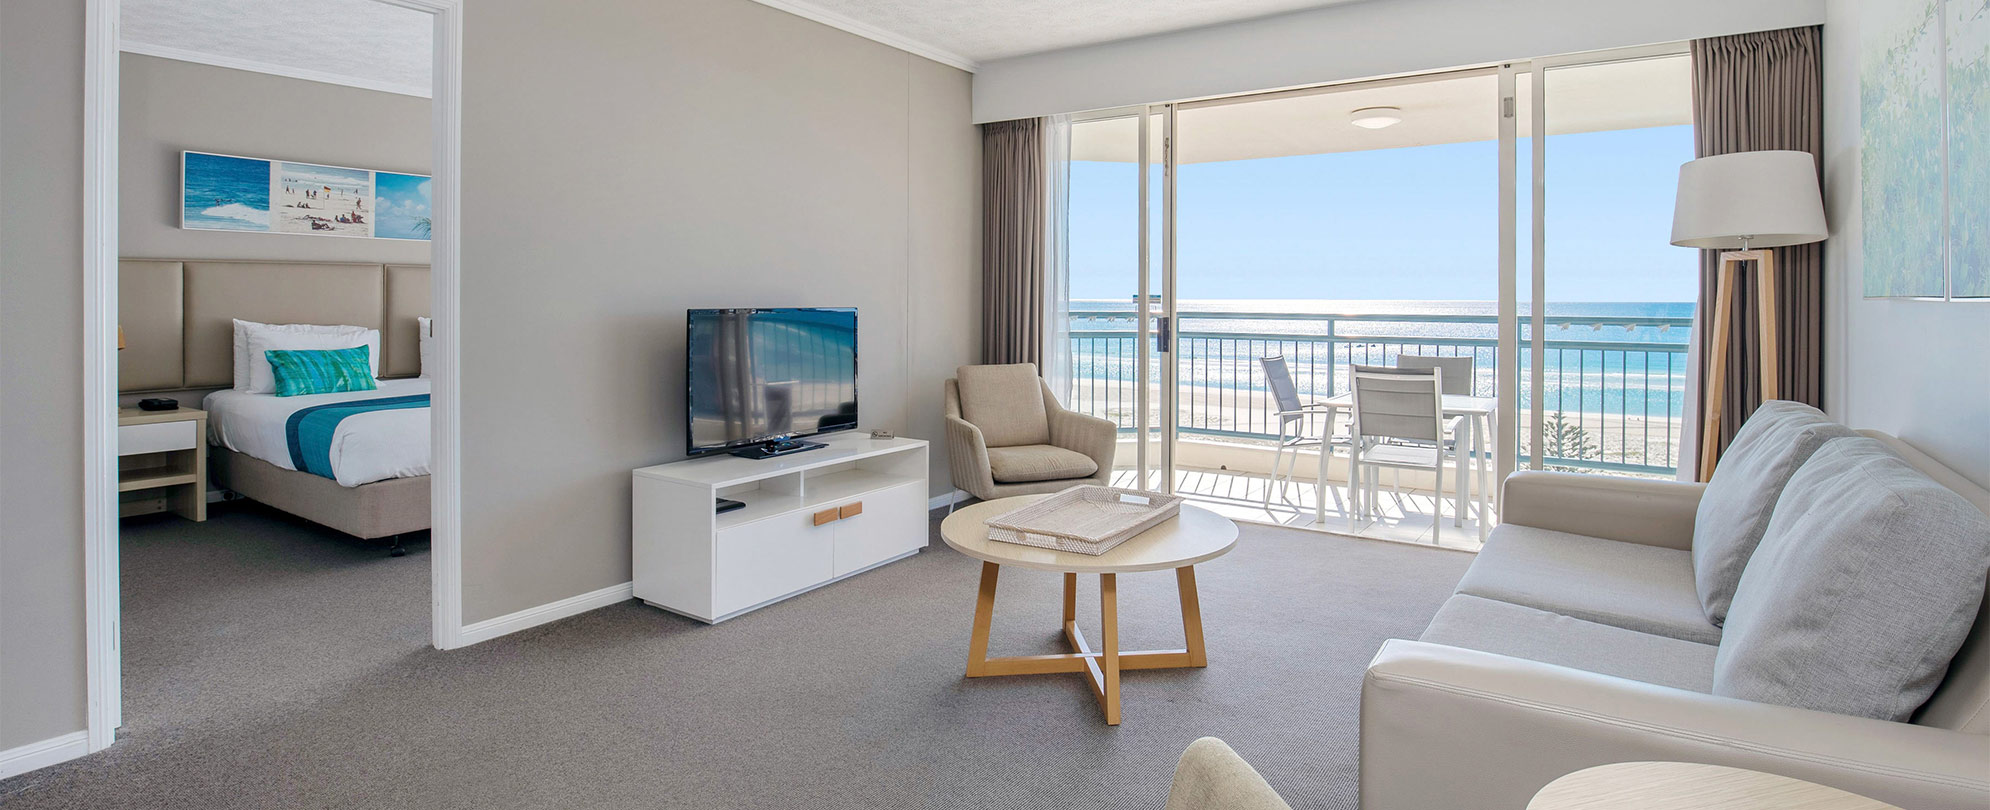 The living area of a Club Wyndham Kirra Beach ocean view suite with a couch, coffee table, tv and an open door to a bedroom.